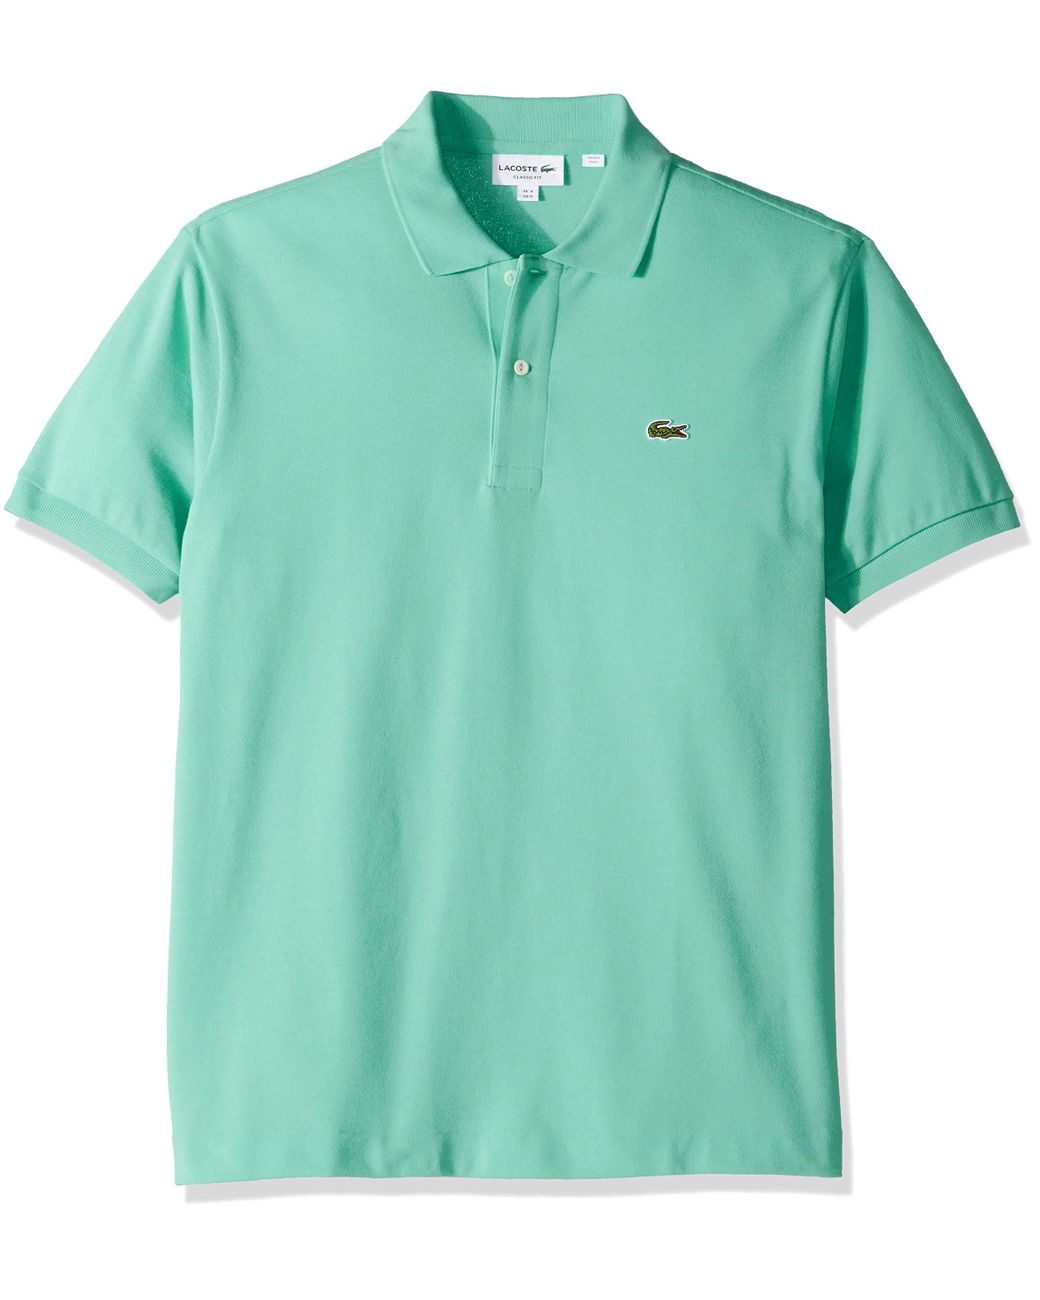 Lacoste Legacy Short Sleeve L.12.12 Pique Polo Shirt in Mint Green ...